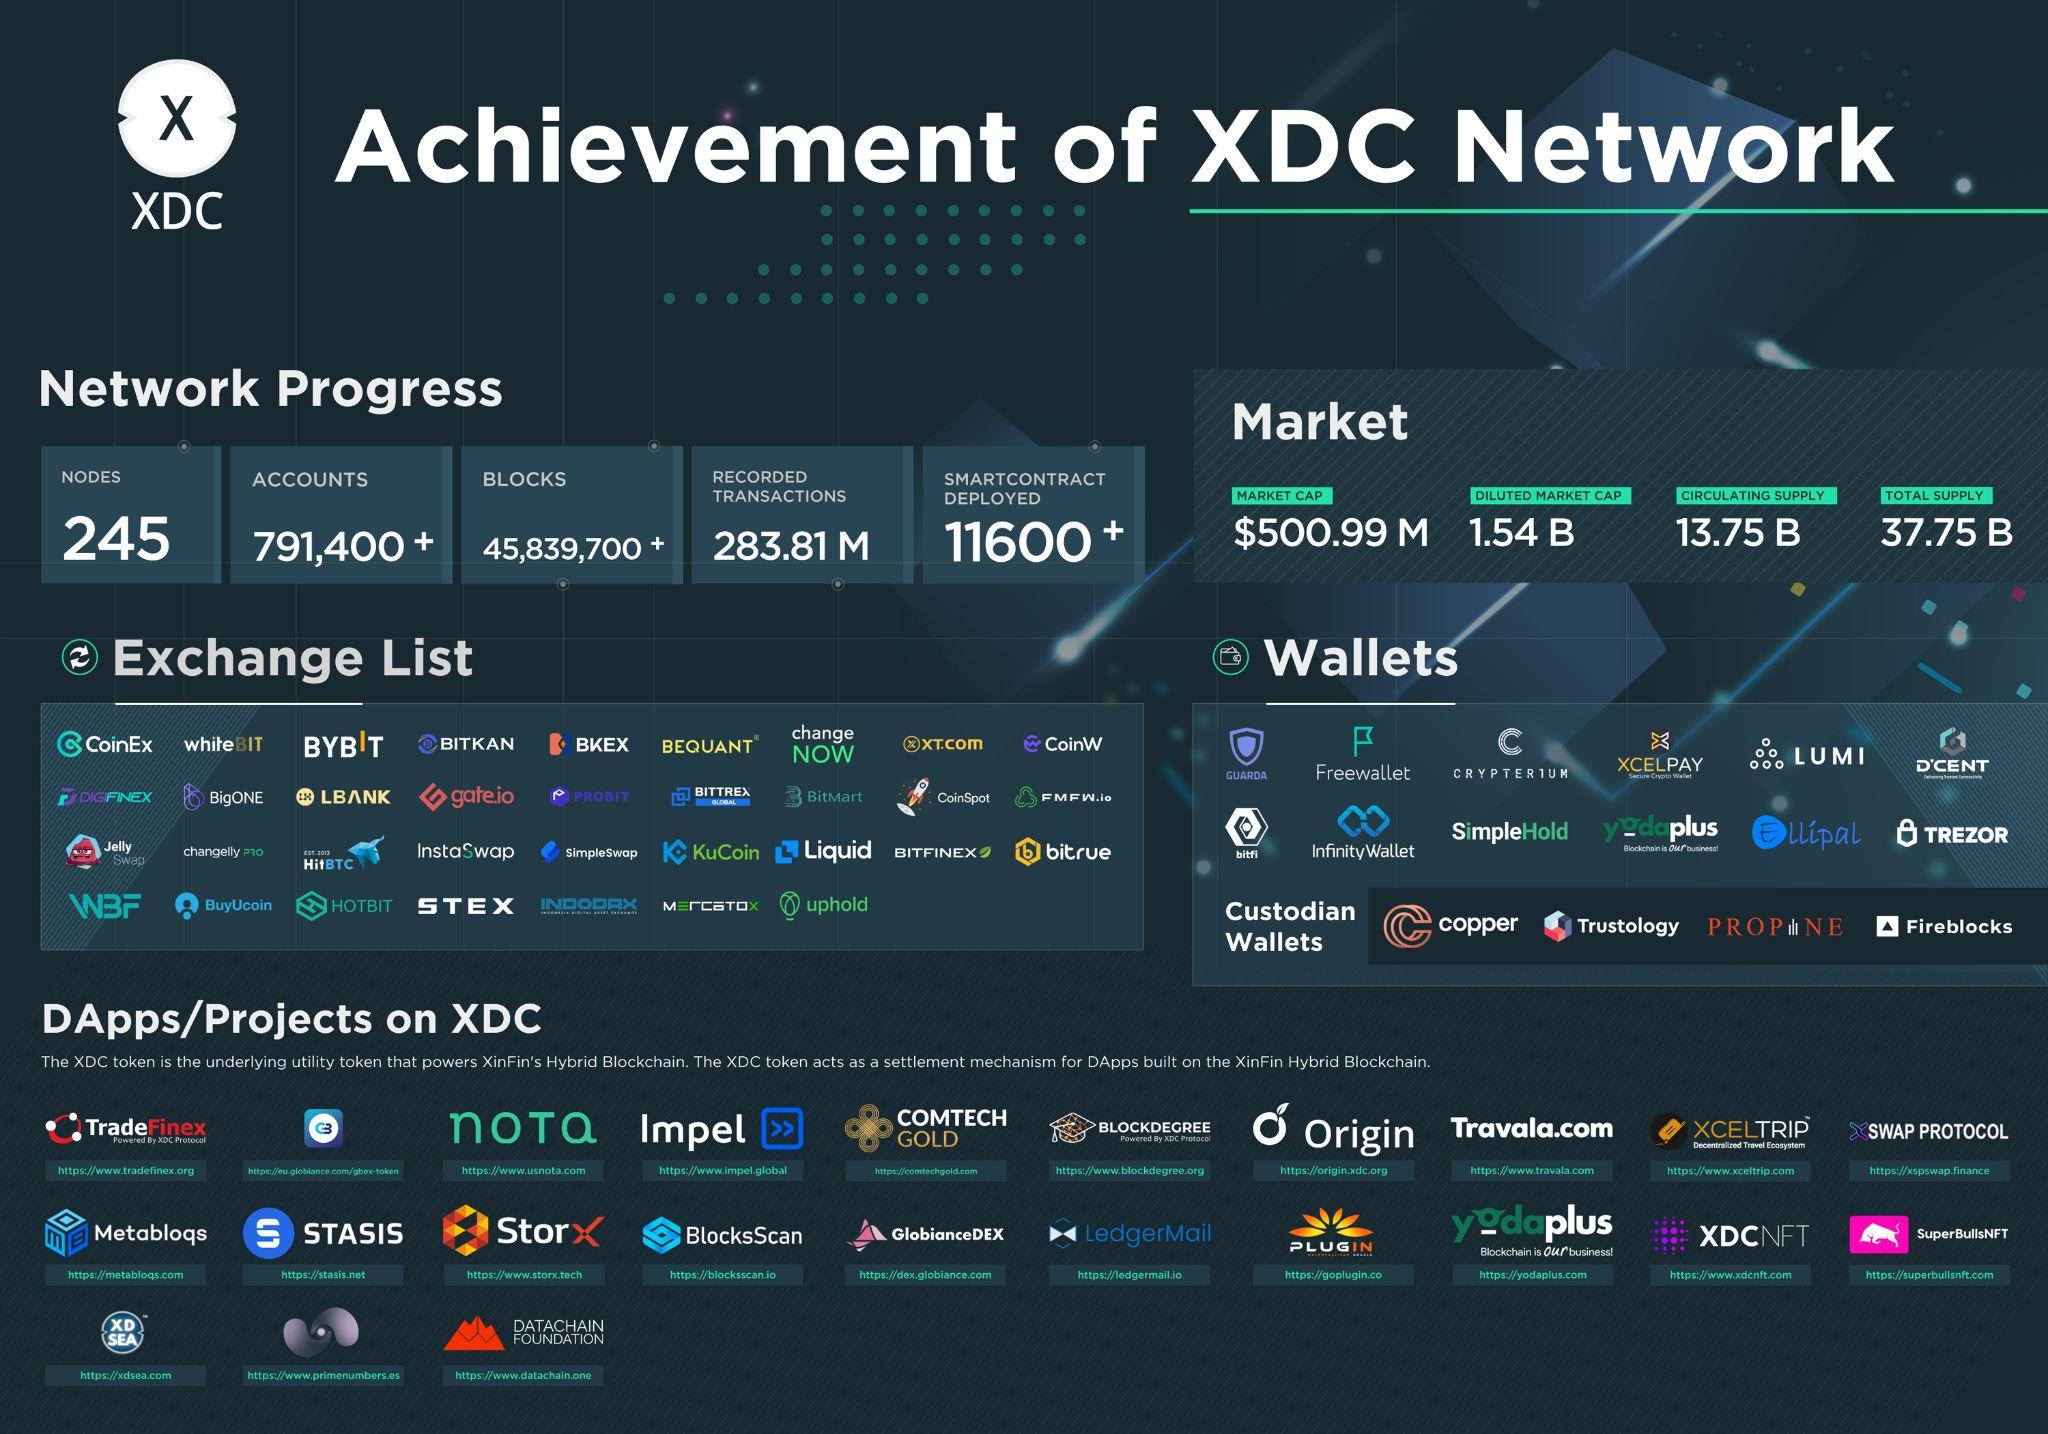 XDC Network Completes 3 Successful Years Dominating the Blockchain Sector